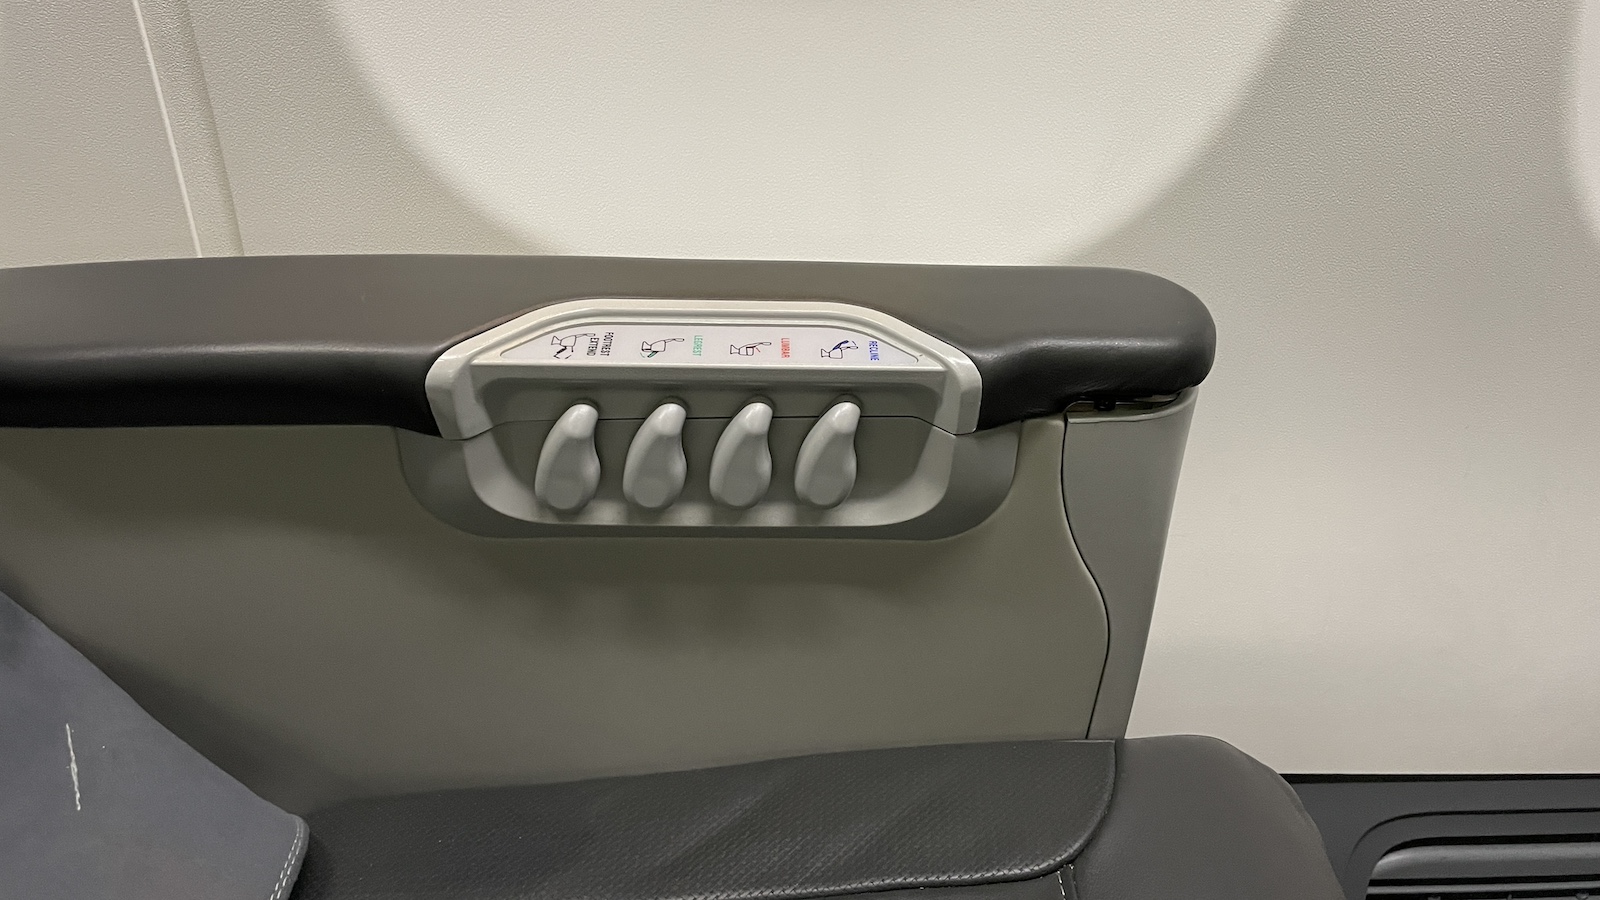 Rex Airlines Brisbane to Sydney Boeing 737 Business Class Seat Controllers Point Hacks